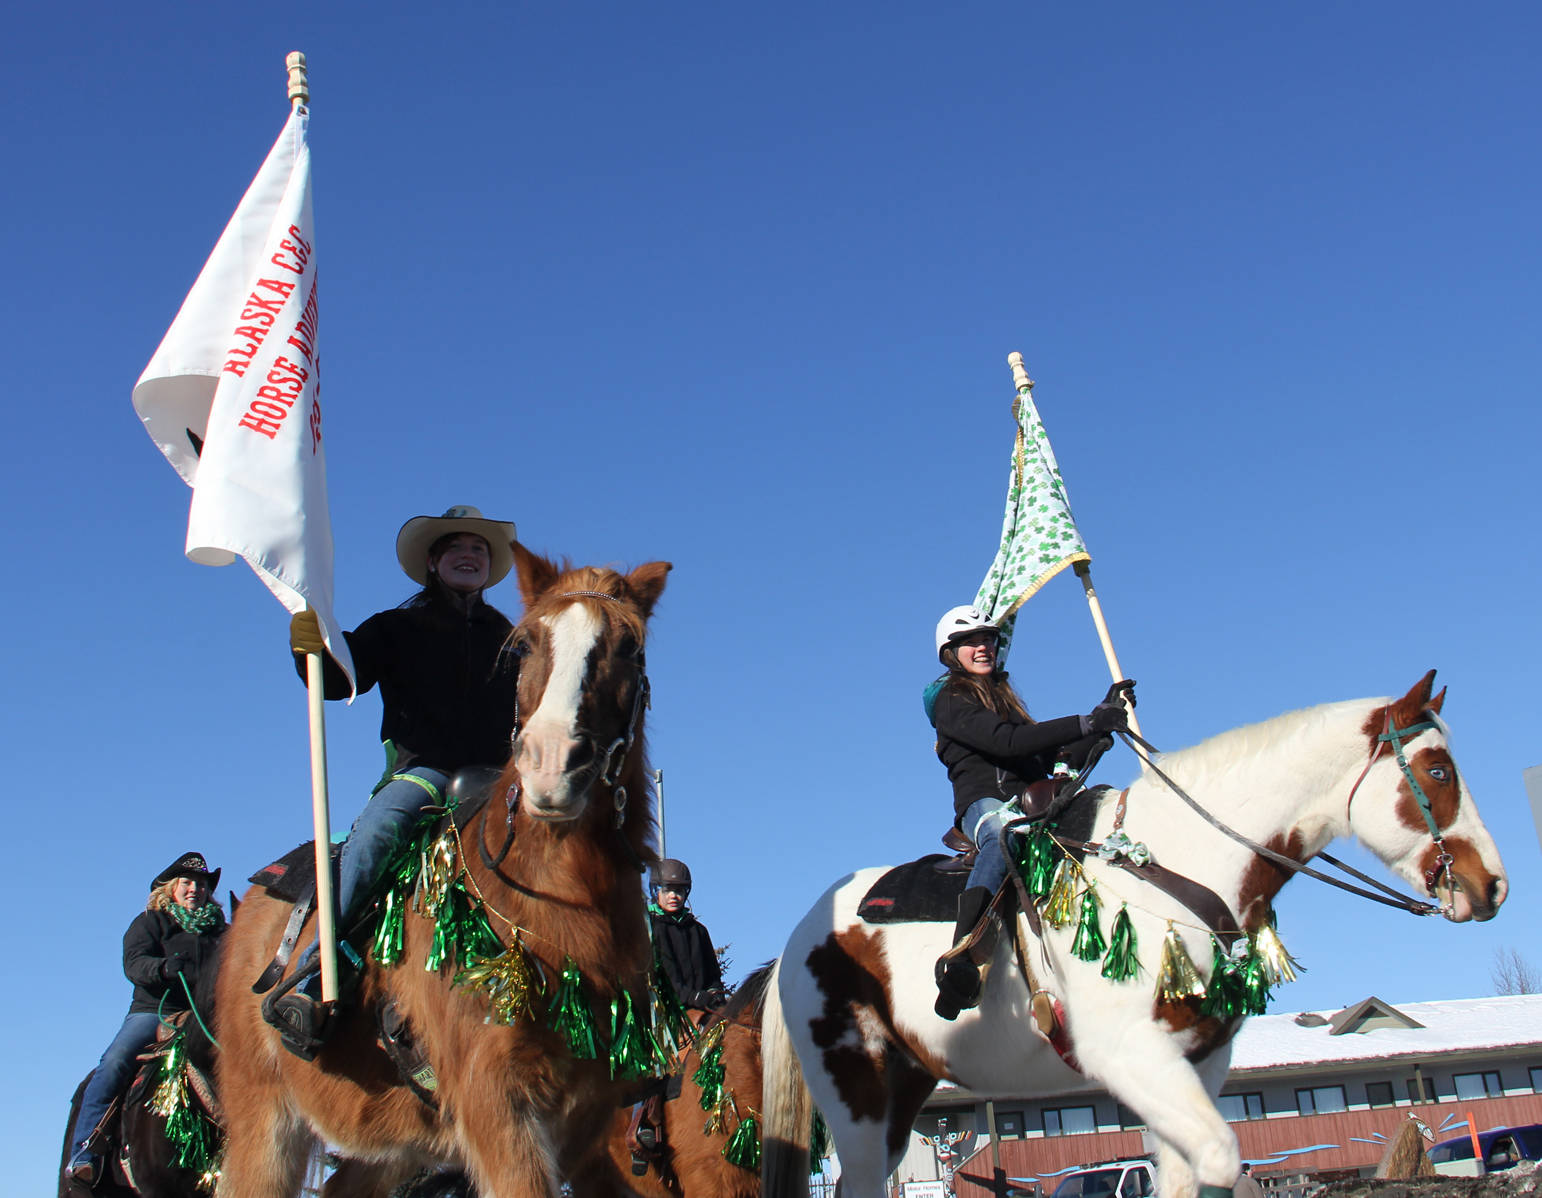 Equestrians joined the parade wearing green.